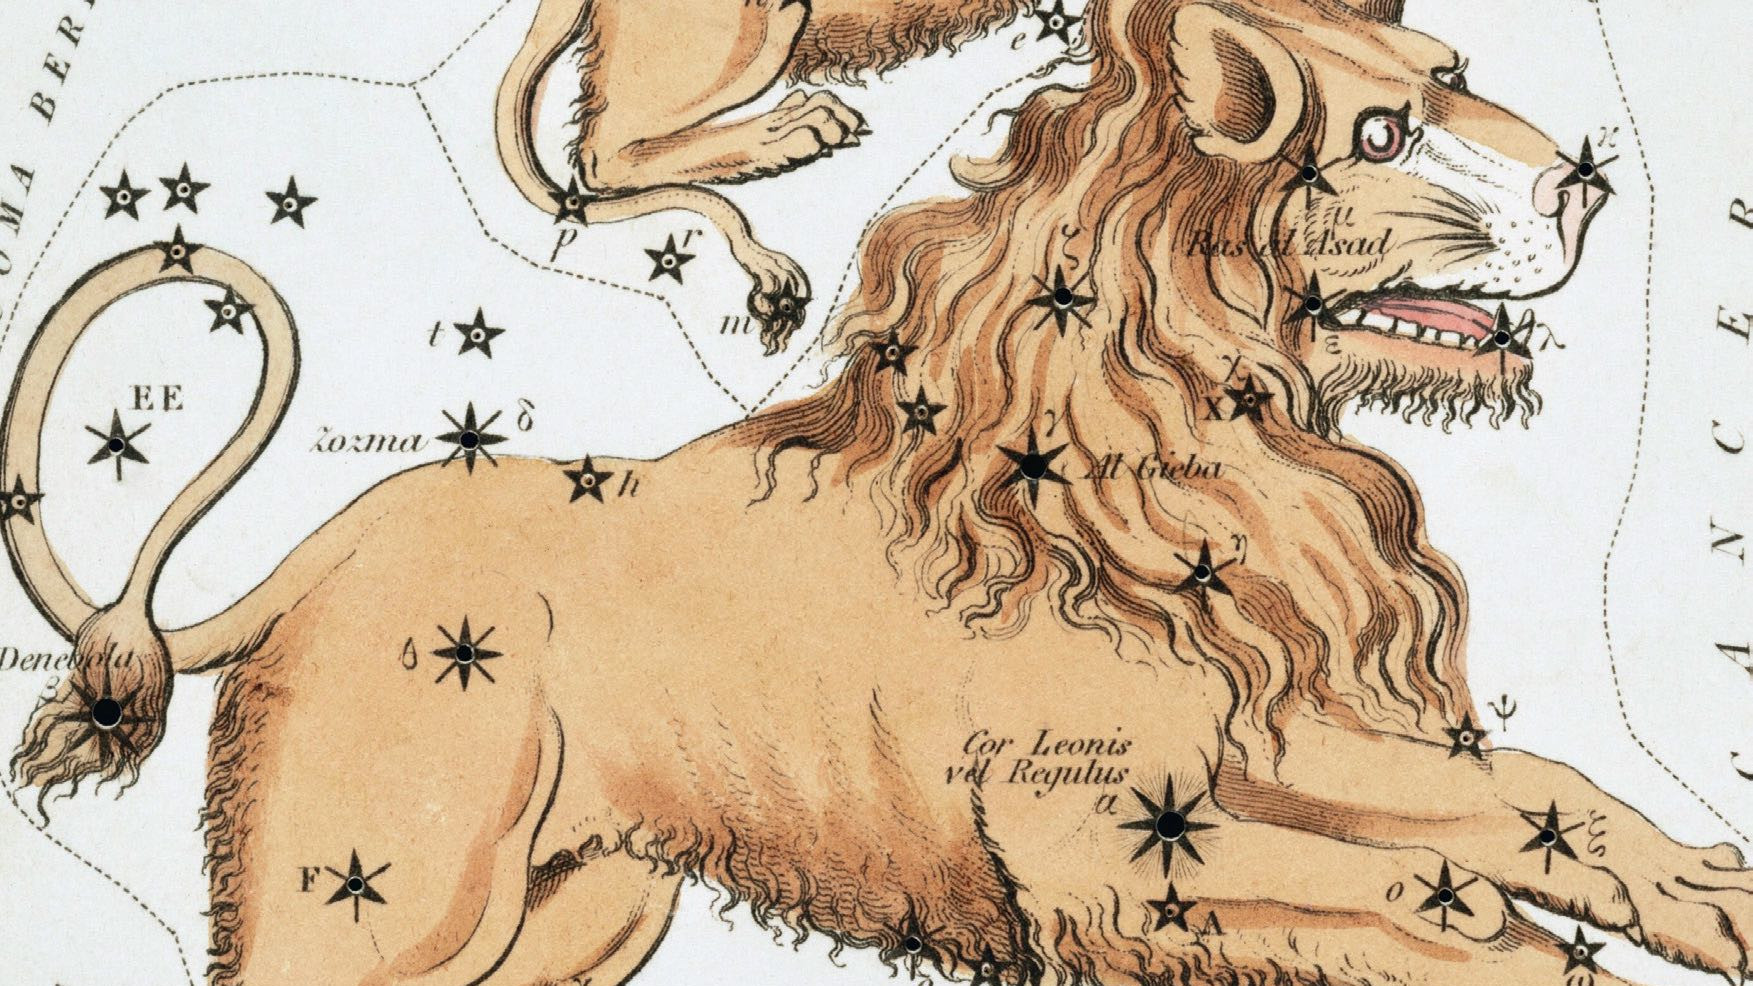 Whereas today you would recognise the constellation’s form as that of a domestic iron, thousands of years ago celestial observers imagined a crouching lion, whose heart is marked by the bright star Regulus.